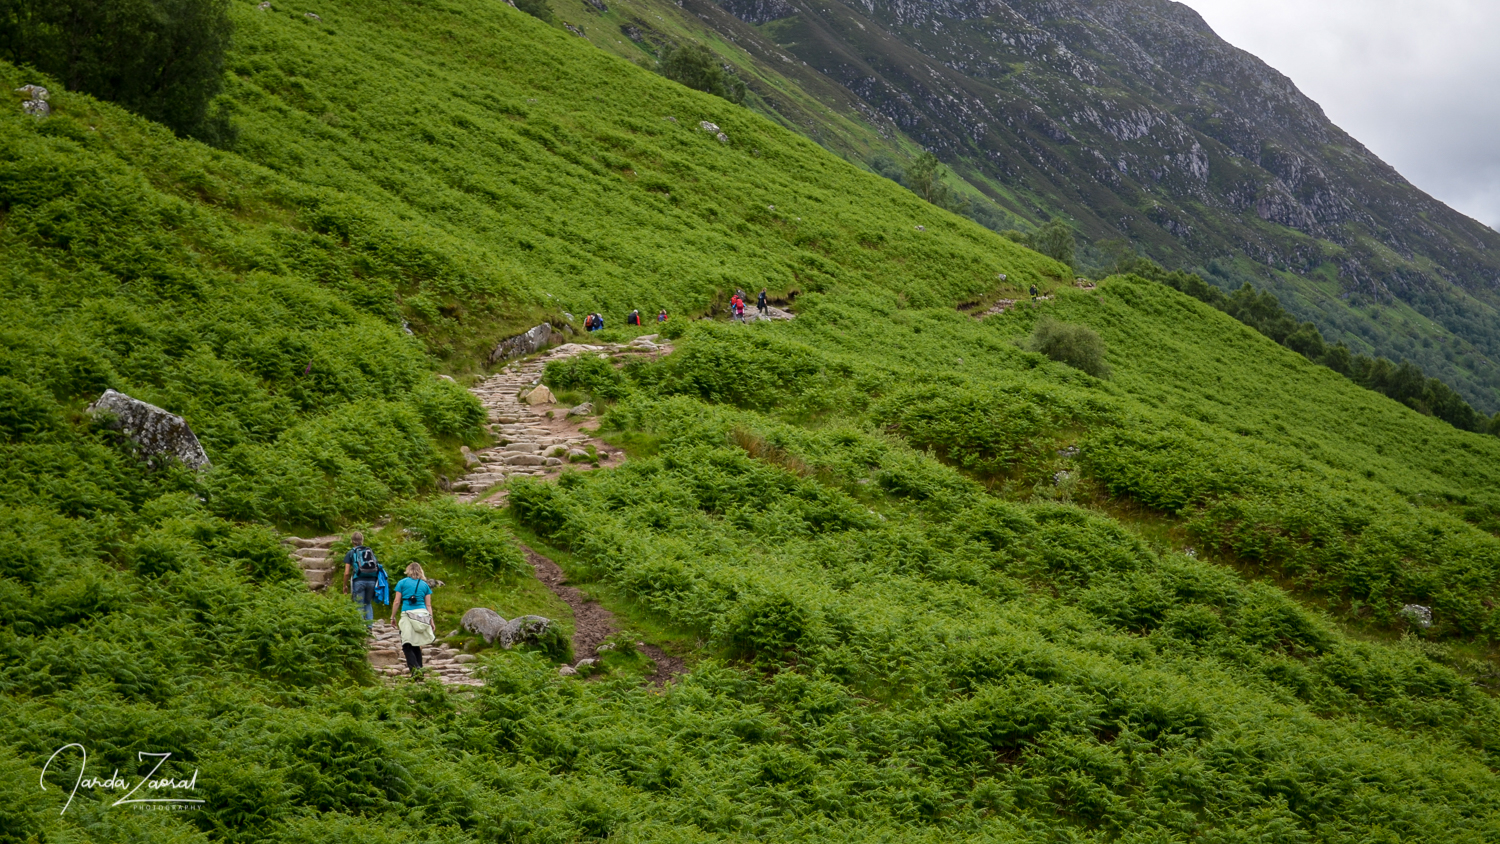 The beginning of the hike to Ben Nevis